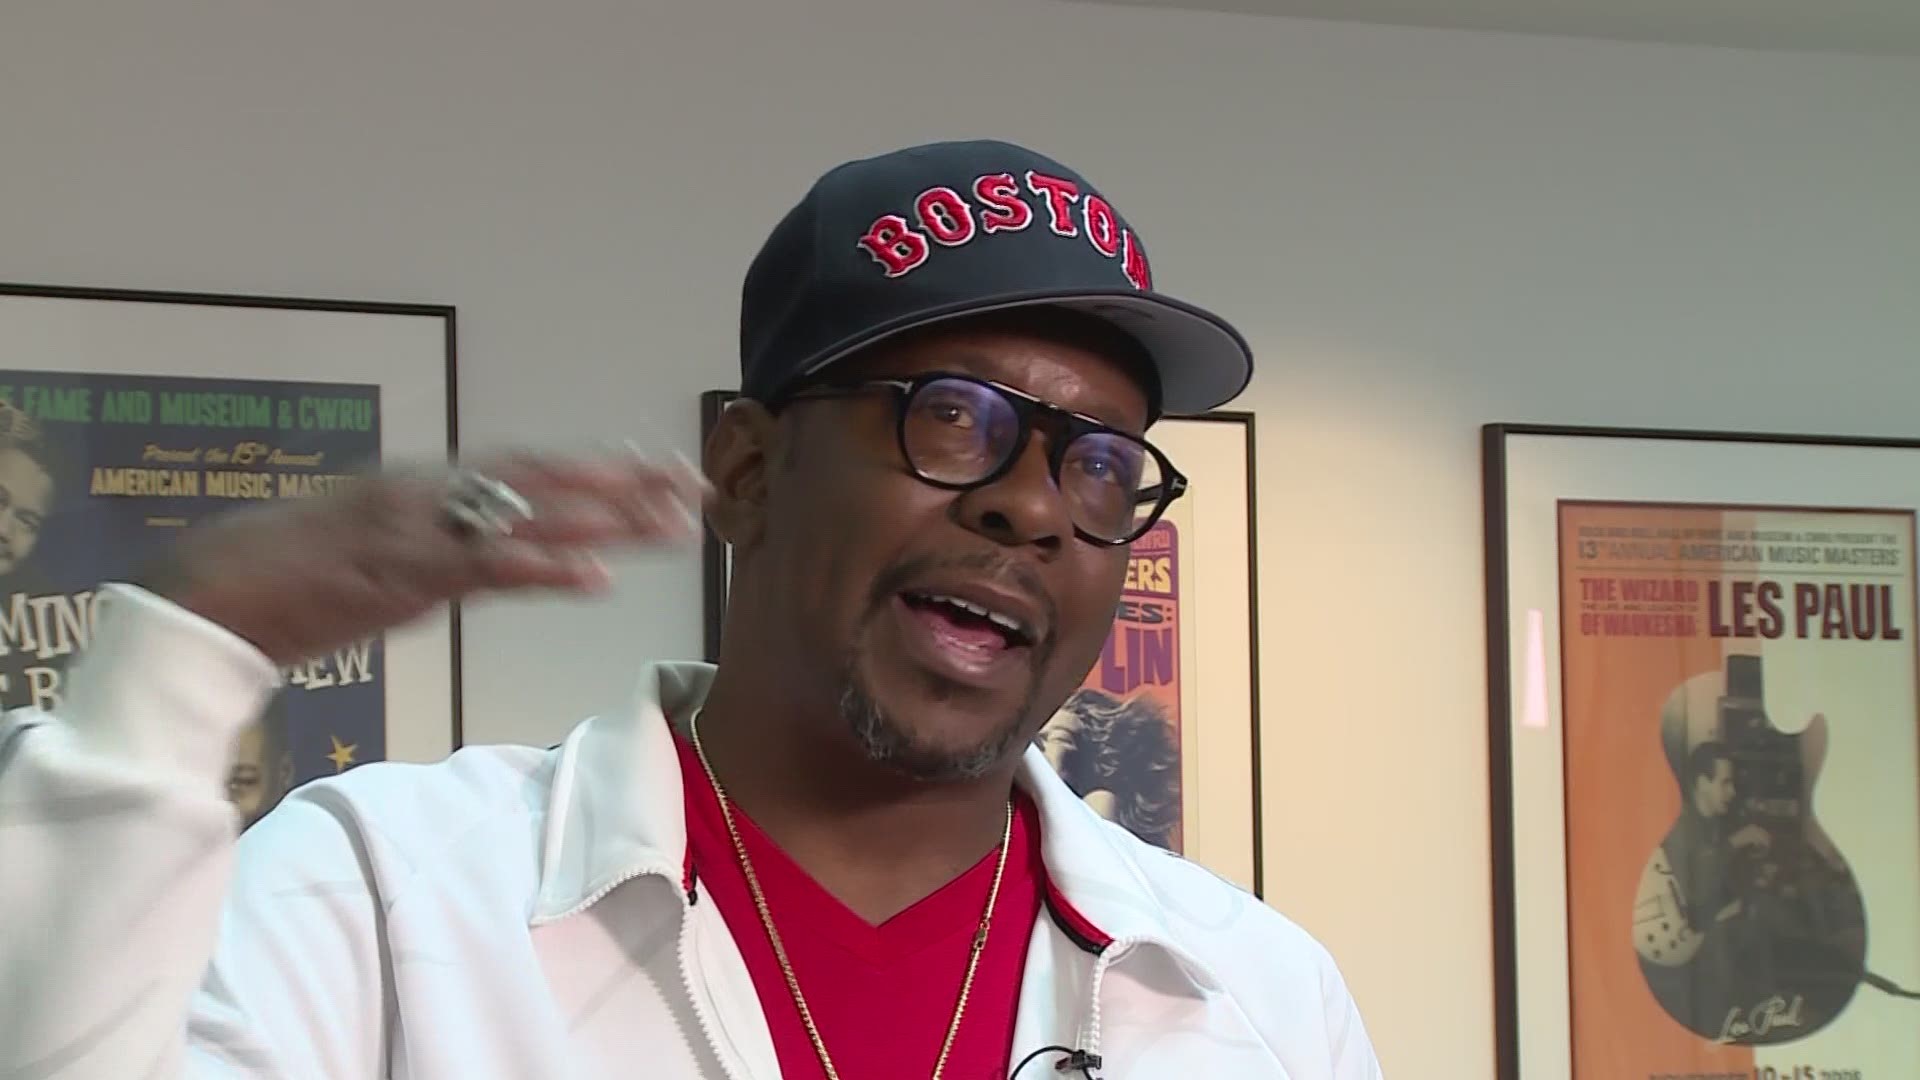 Bobby Brown visited the Rock and ROll Hall of FAme to donate an outfit and stopped to talk about his career, influences, and what he hopes fans will think  of when they see his outfit in the museum.